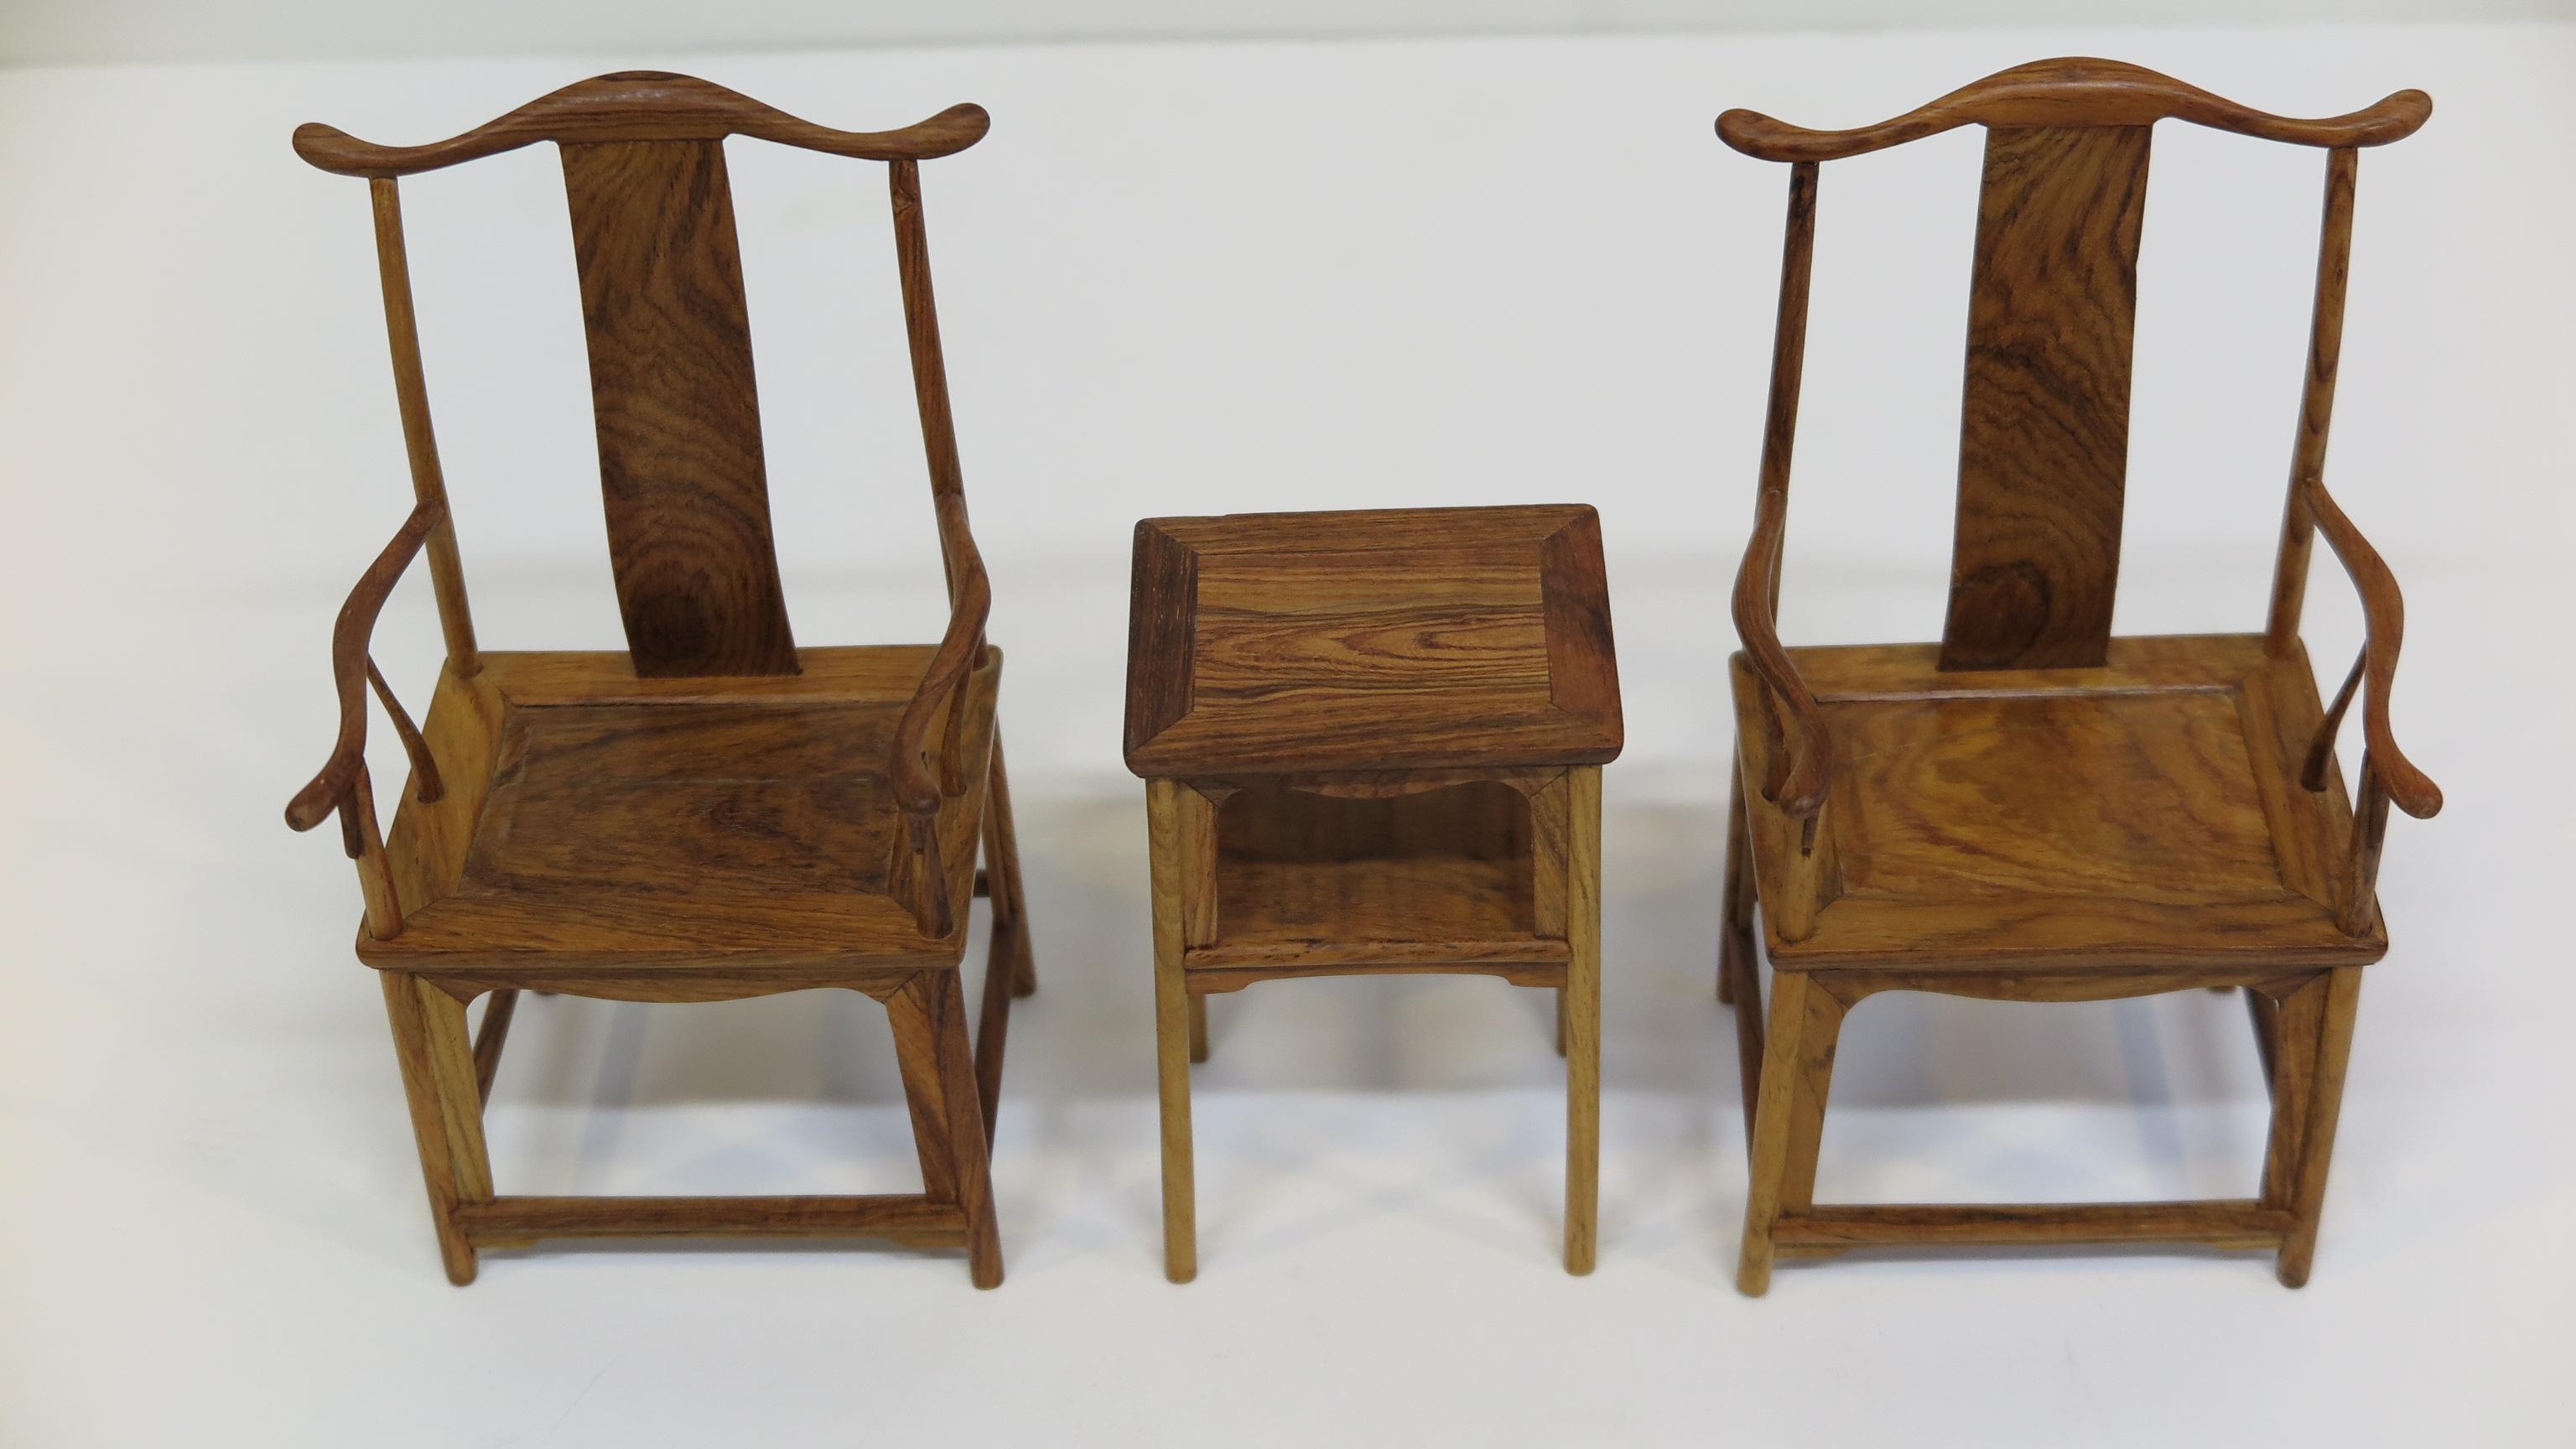 Miniature Huanghuali Chinese official's hat chair set with table. An expertly crafted miniature architectural model in Huanhuali wood of 